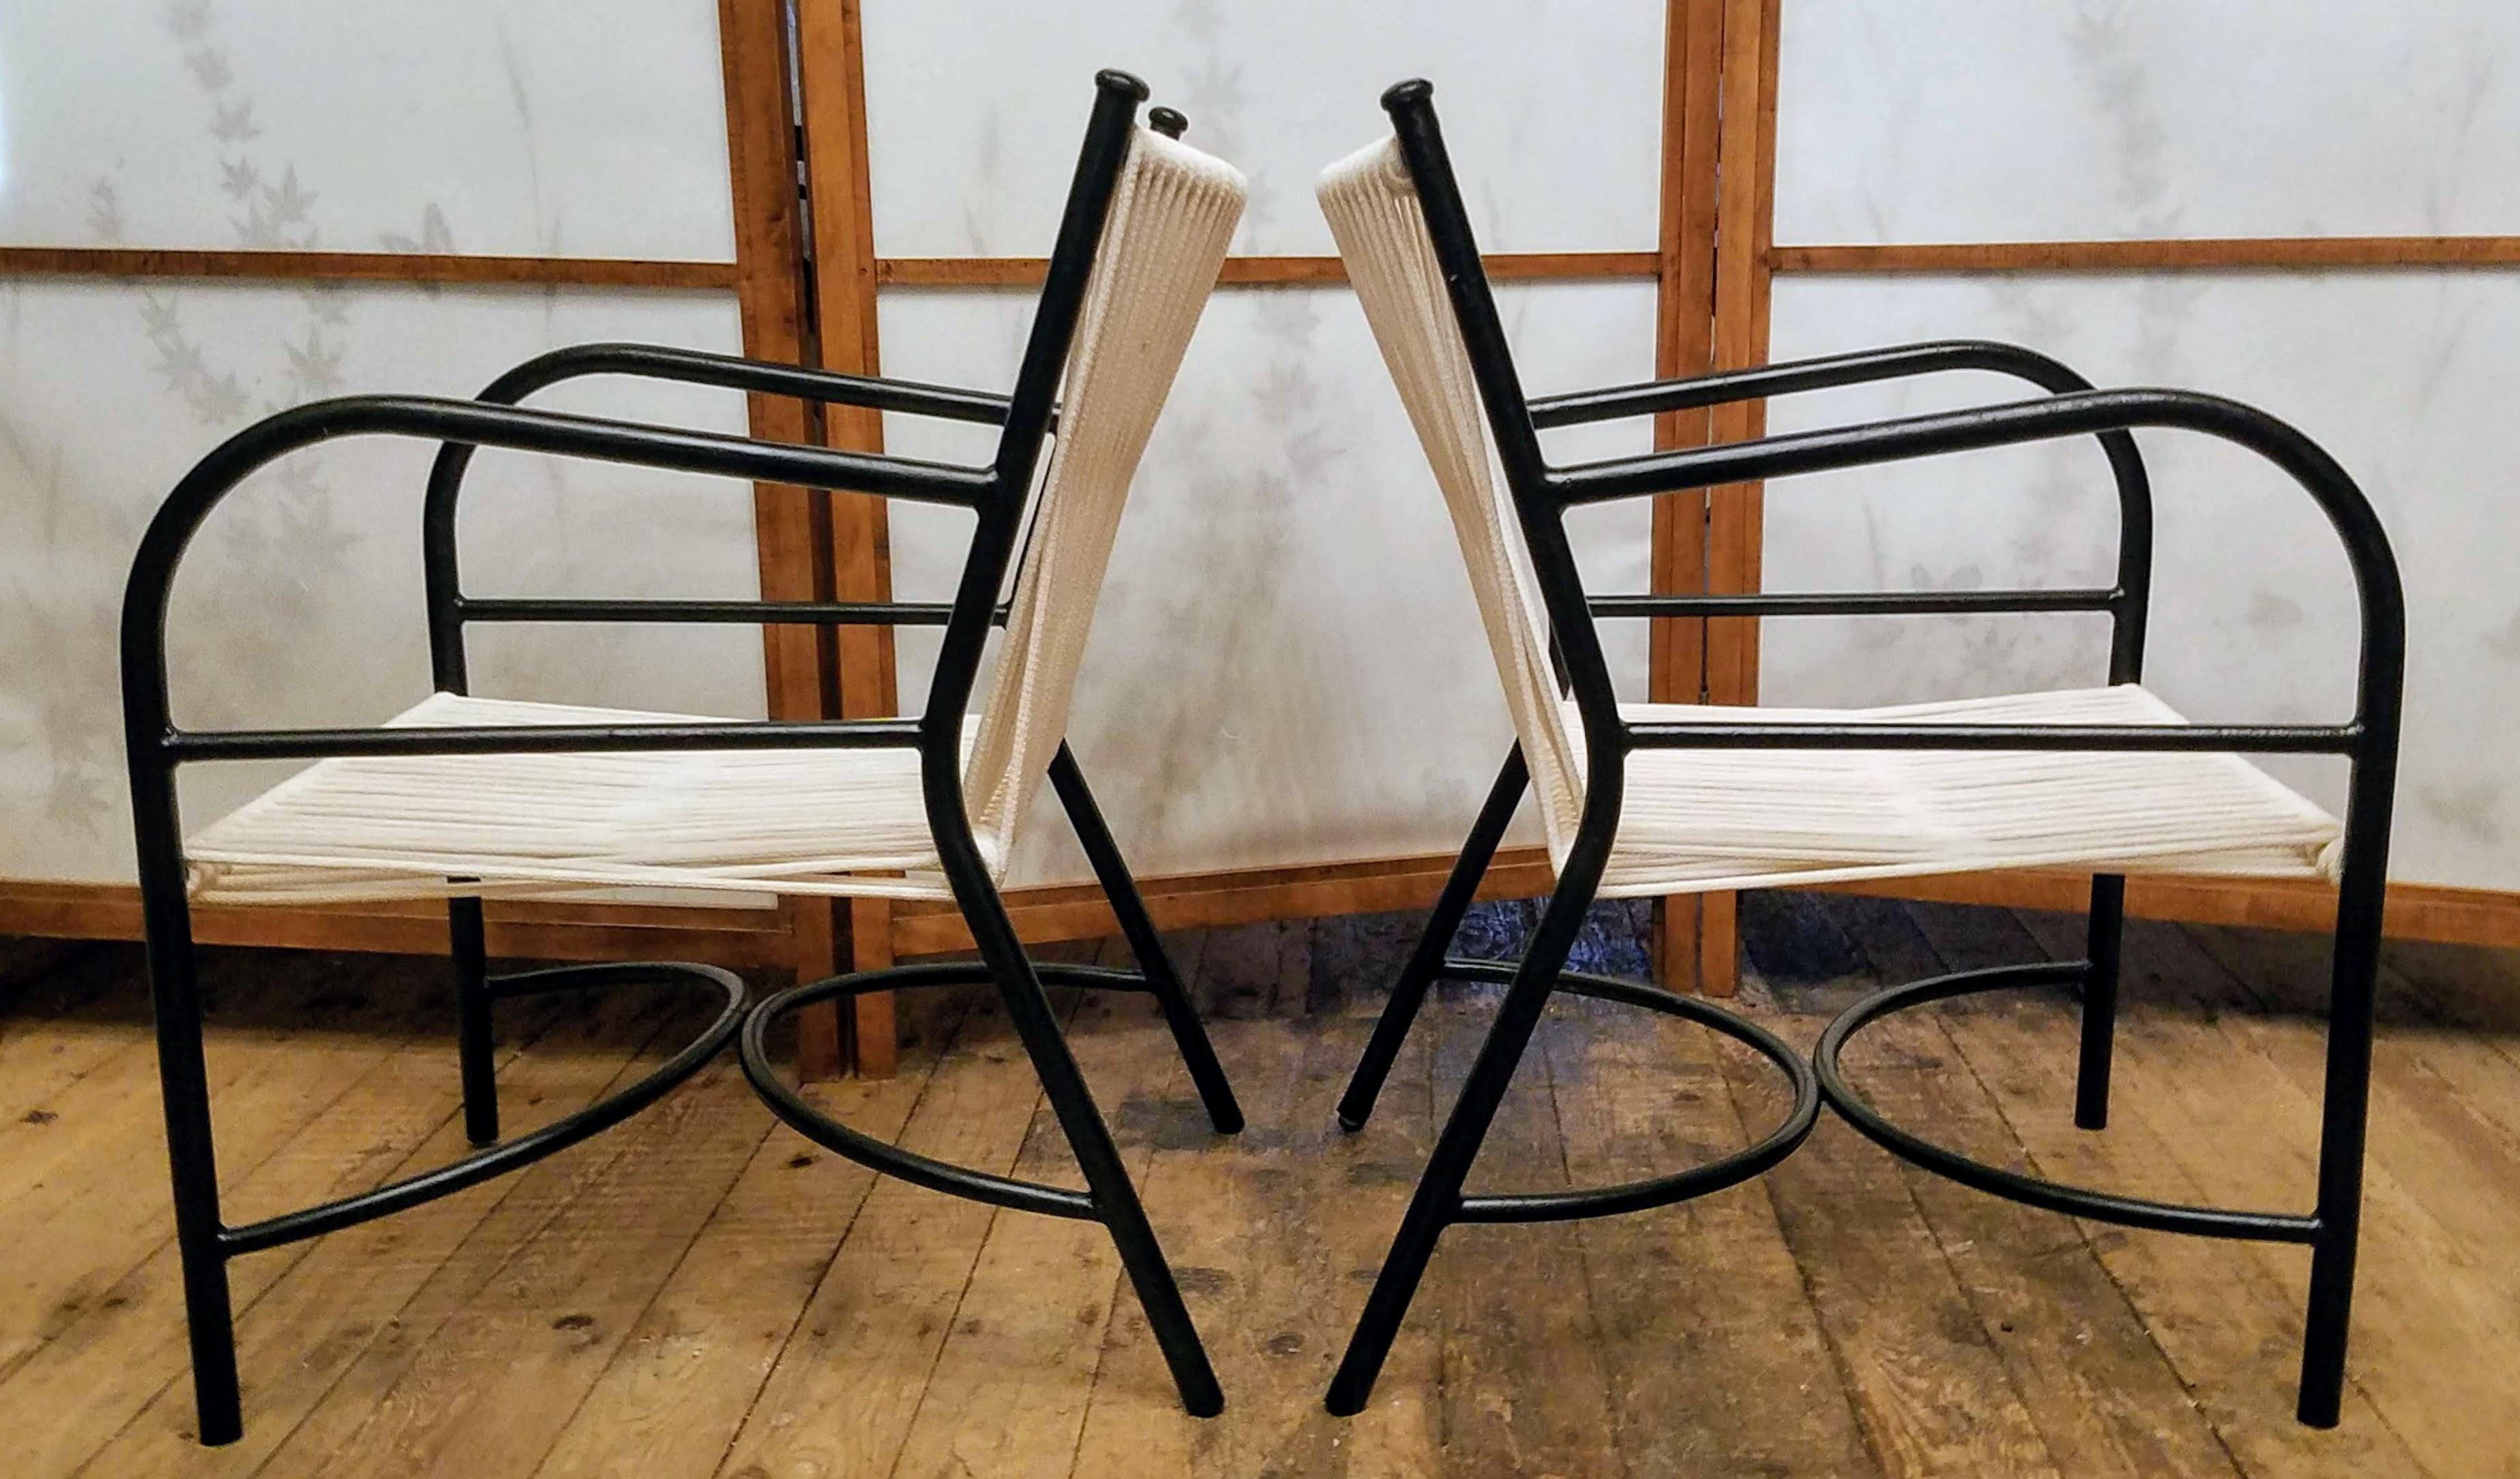 Robert Lewis Set of Four Lounge Chairs Studio Crafted Santa Barbara, CA. 1940s In Good Condition For Sale In Camden, ME